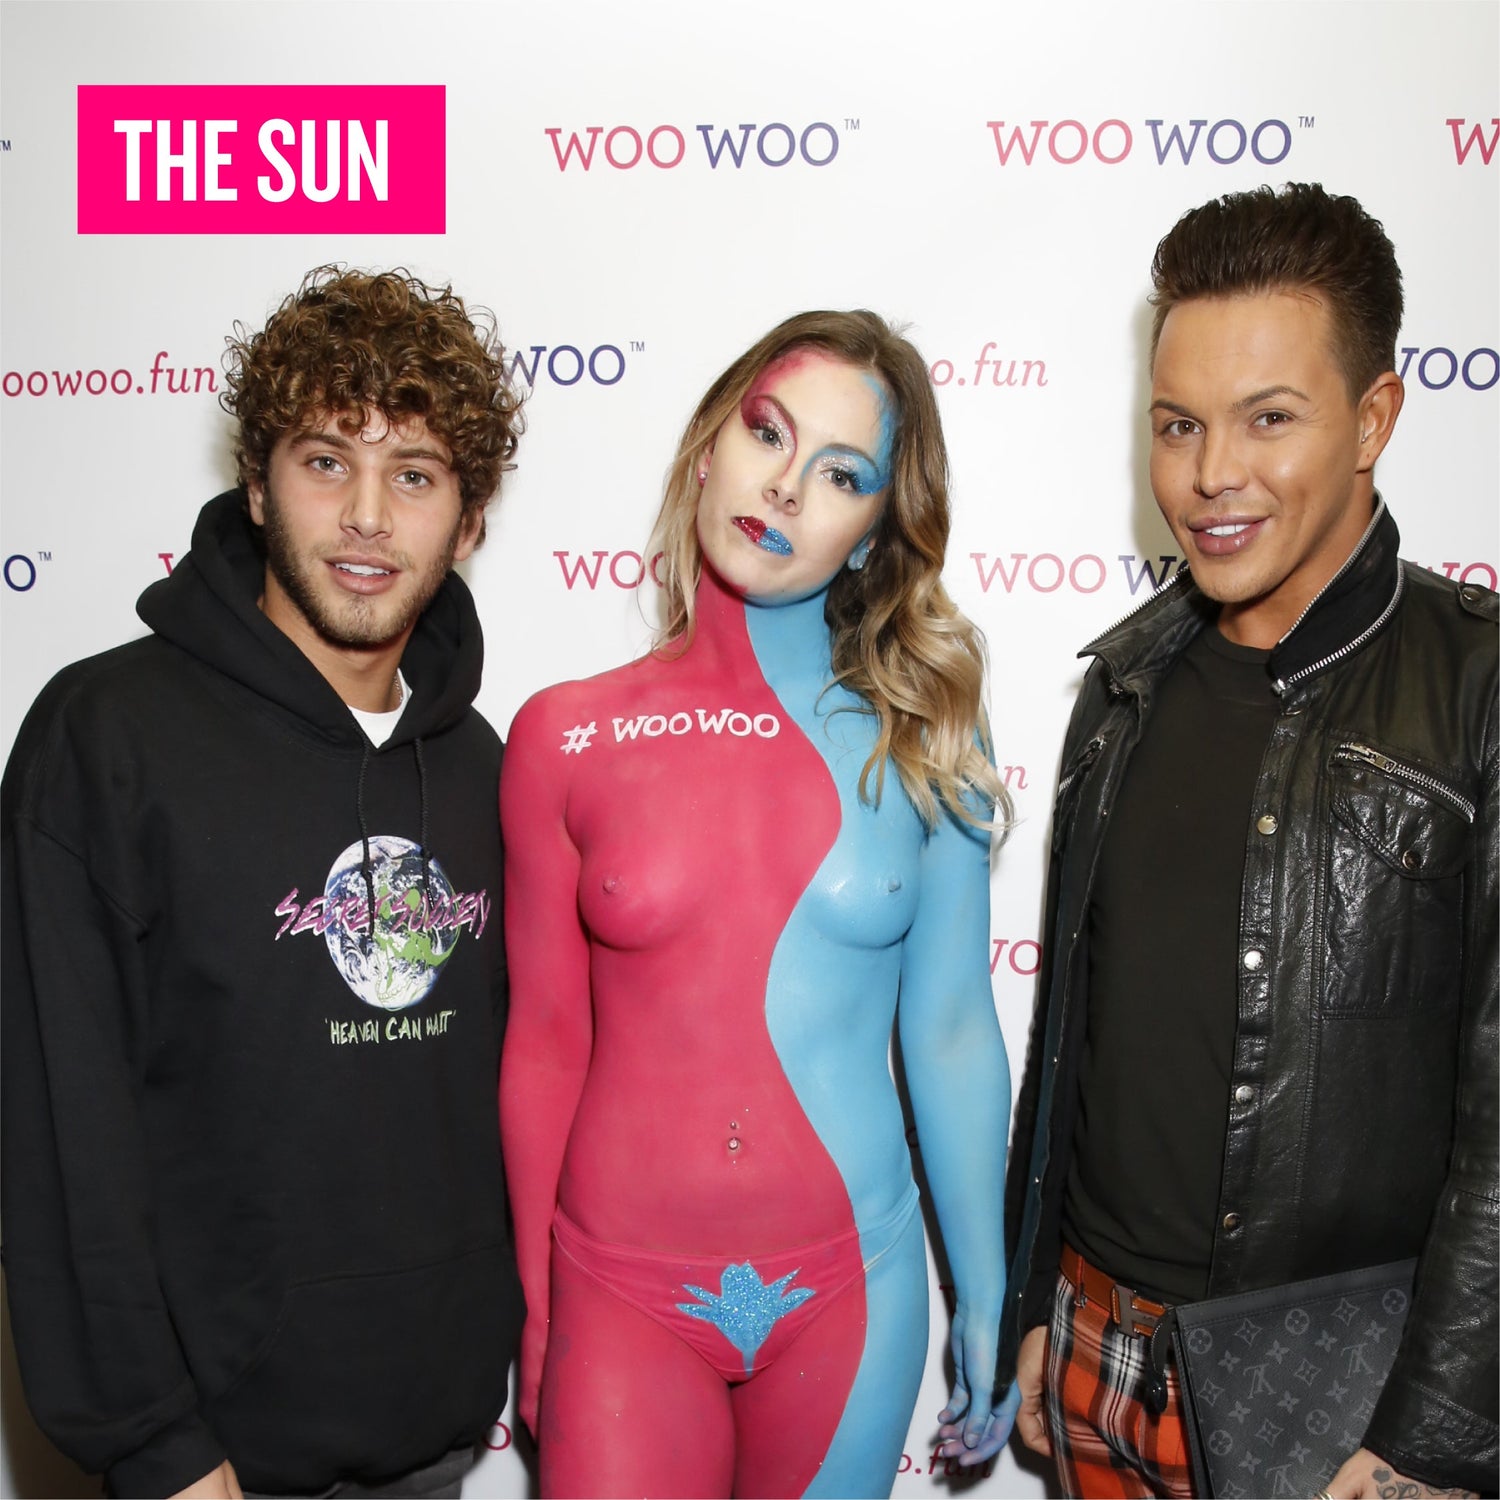 Bobby Norris & Eyal Booker at the woowoo launch party